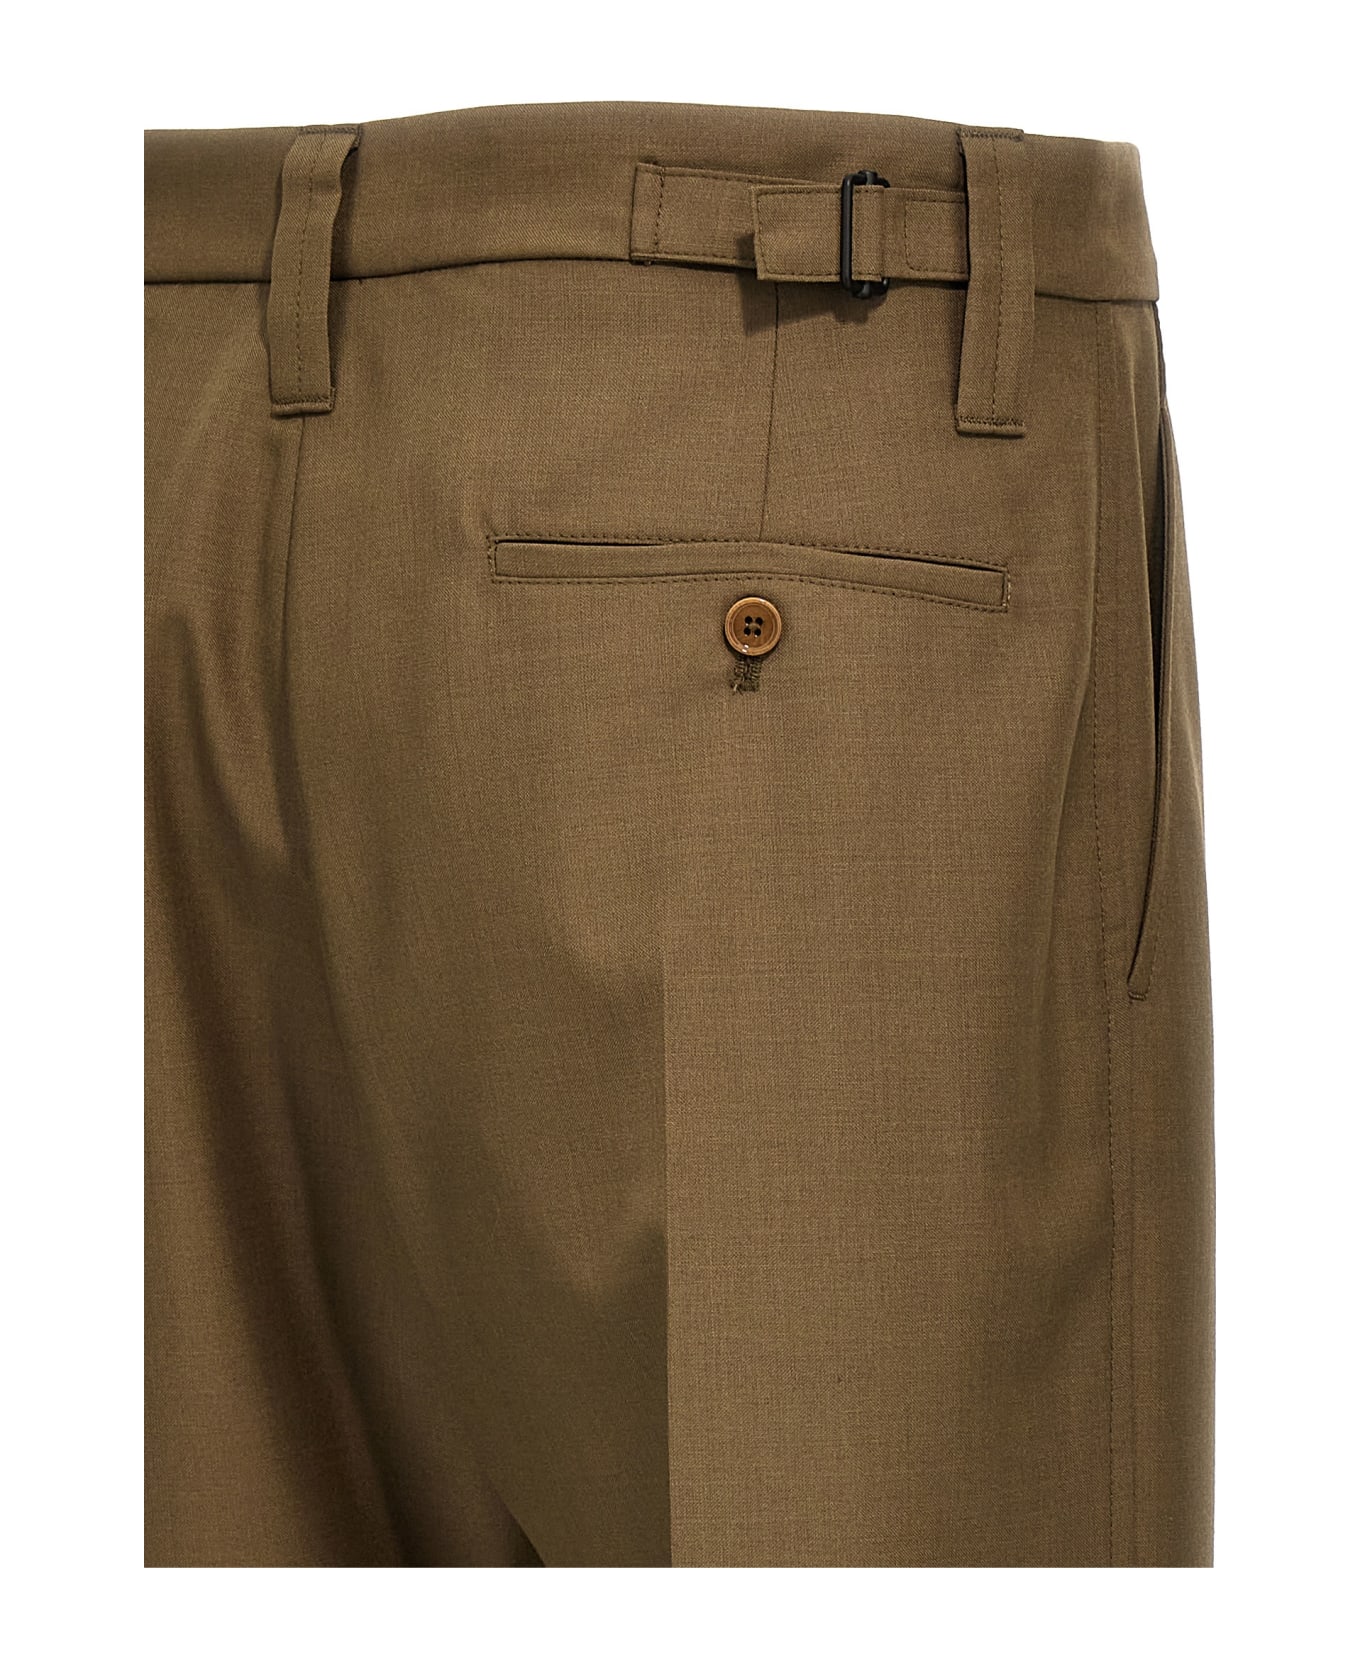 Lemaire 'one Pleat' Trousers - Brown ボトムス